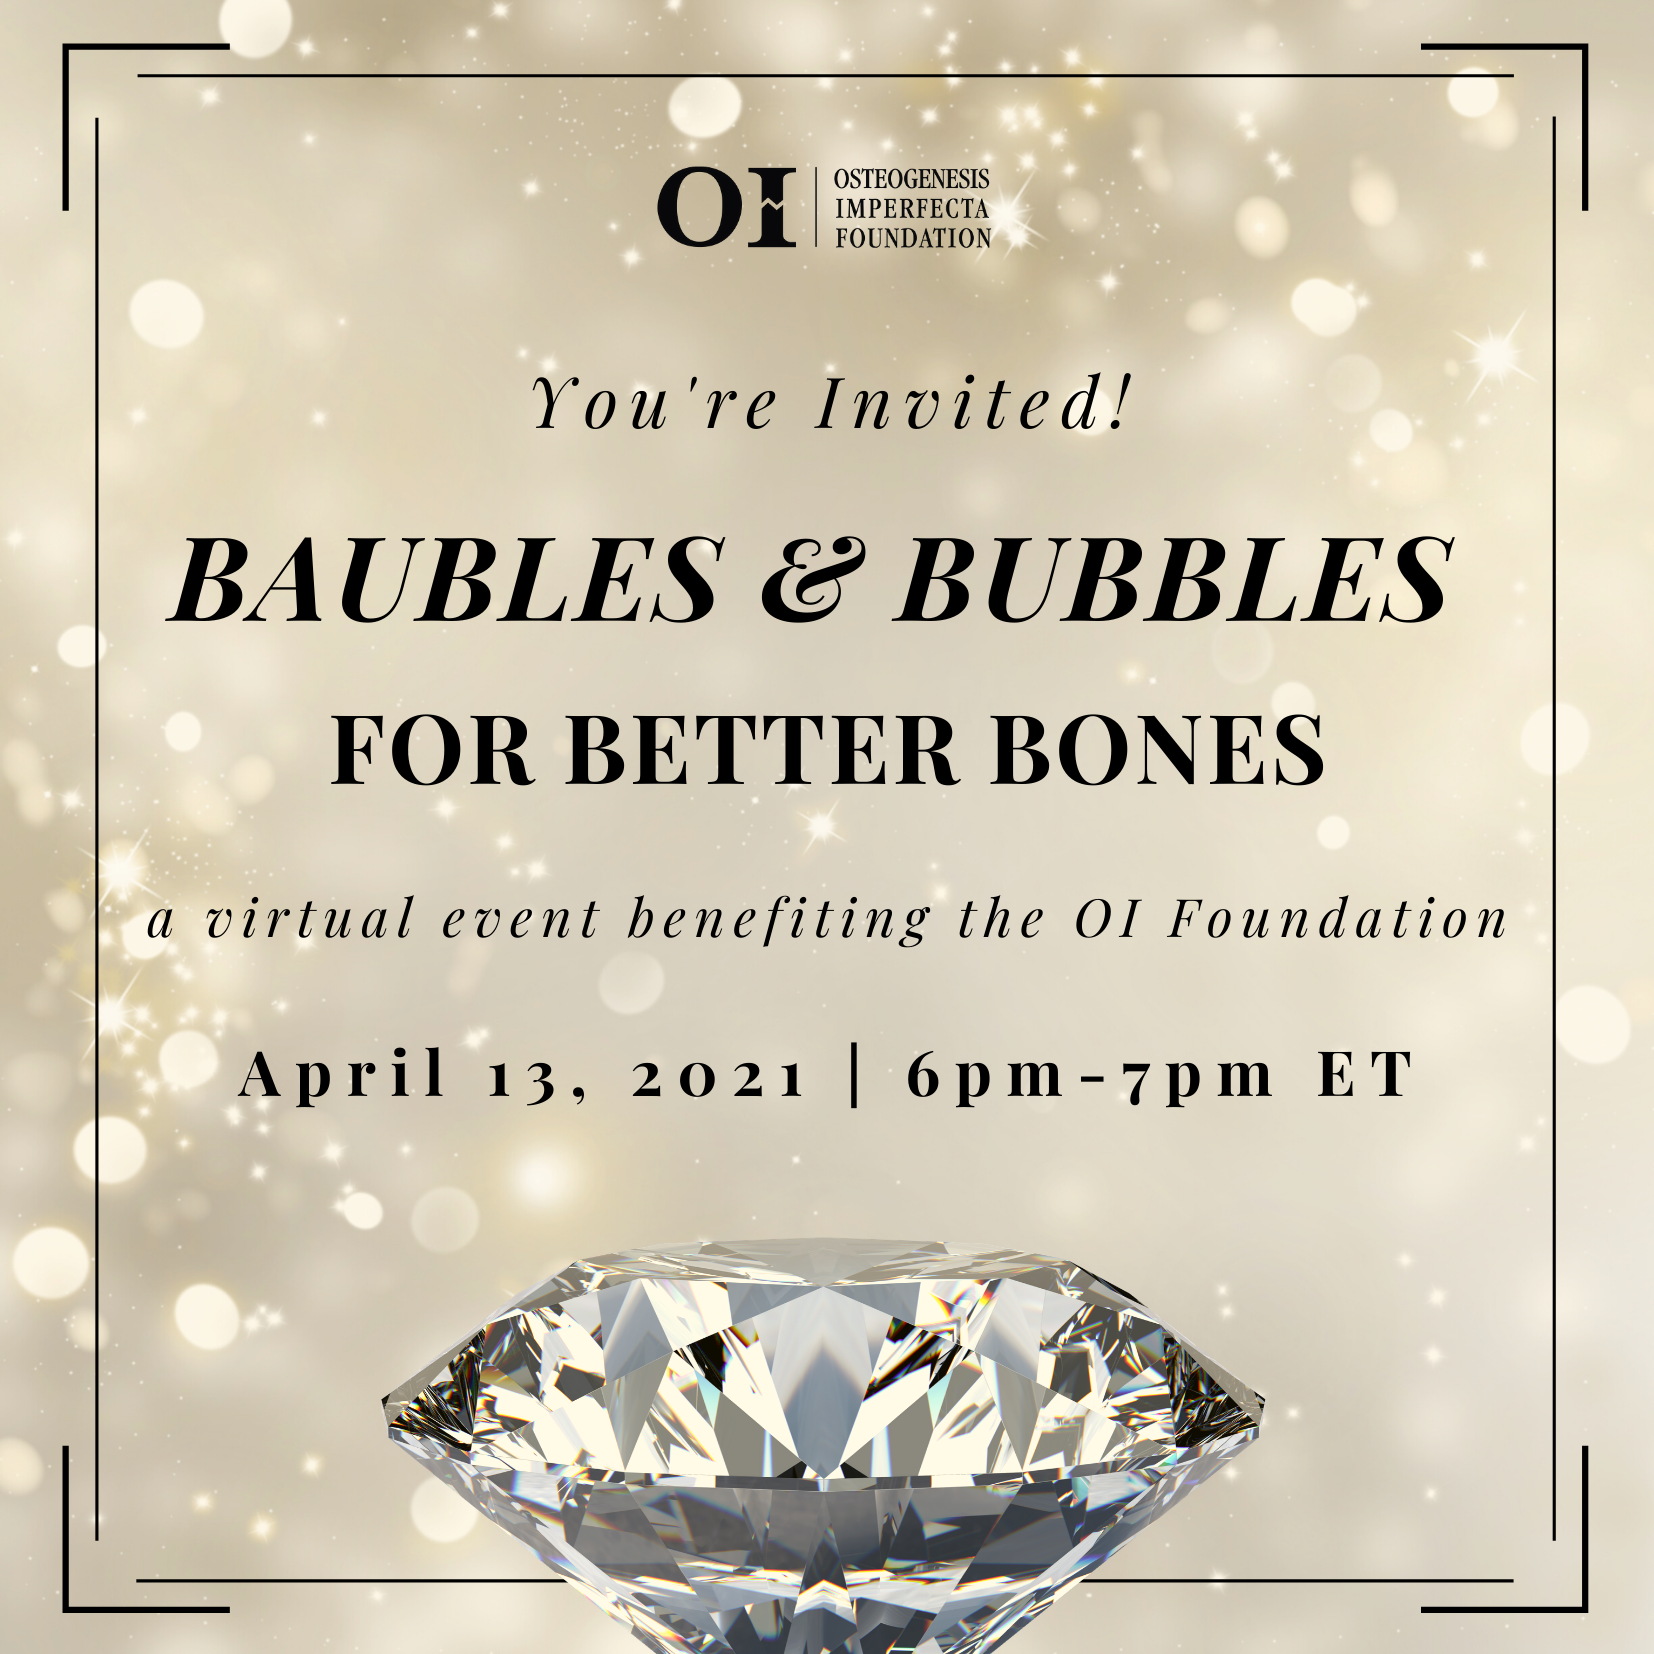 You’re invited to the first-ever Baubles & Bubbles for Better Bones event!